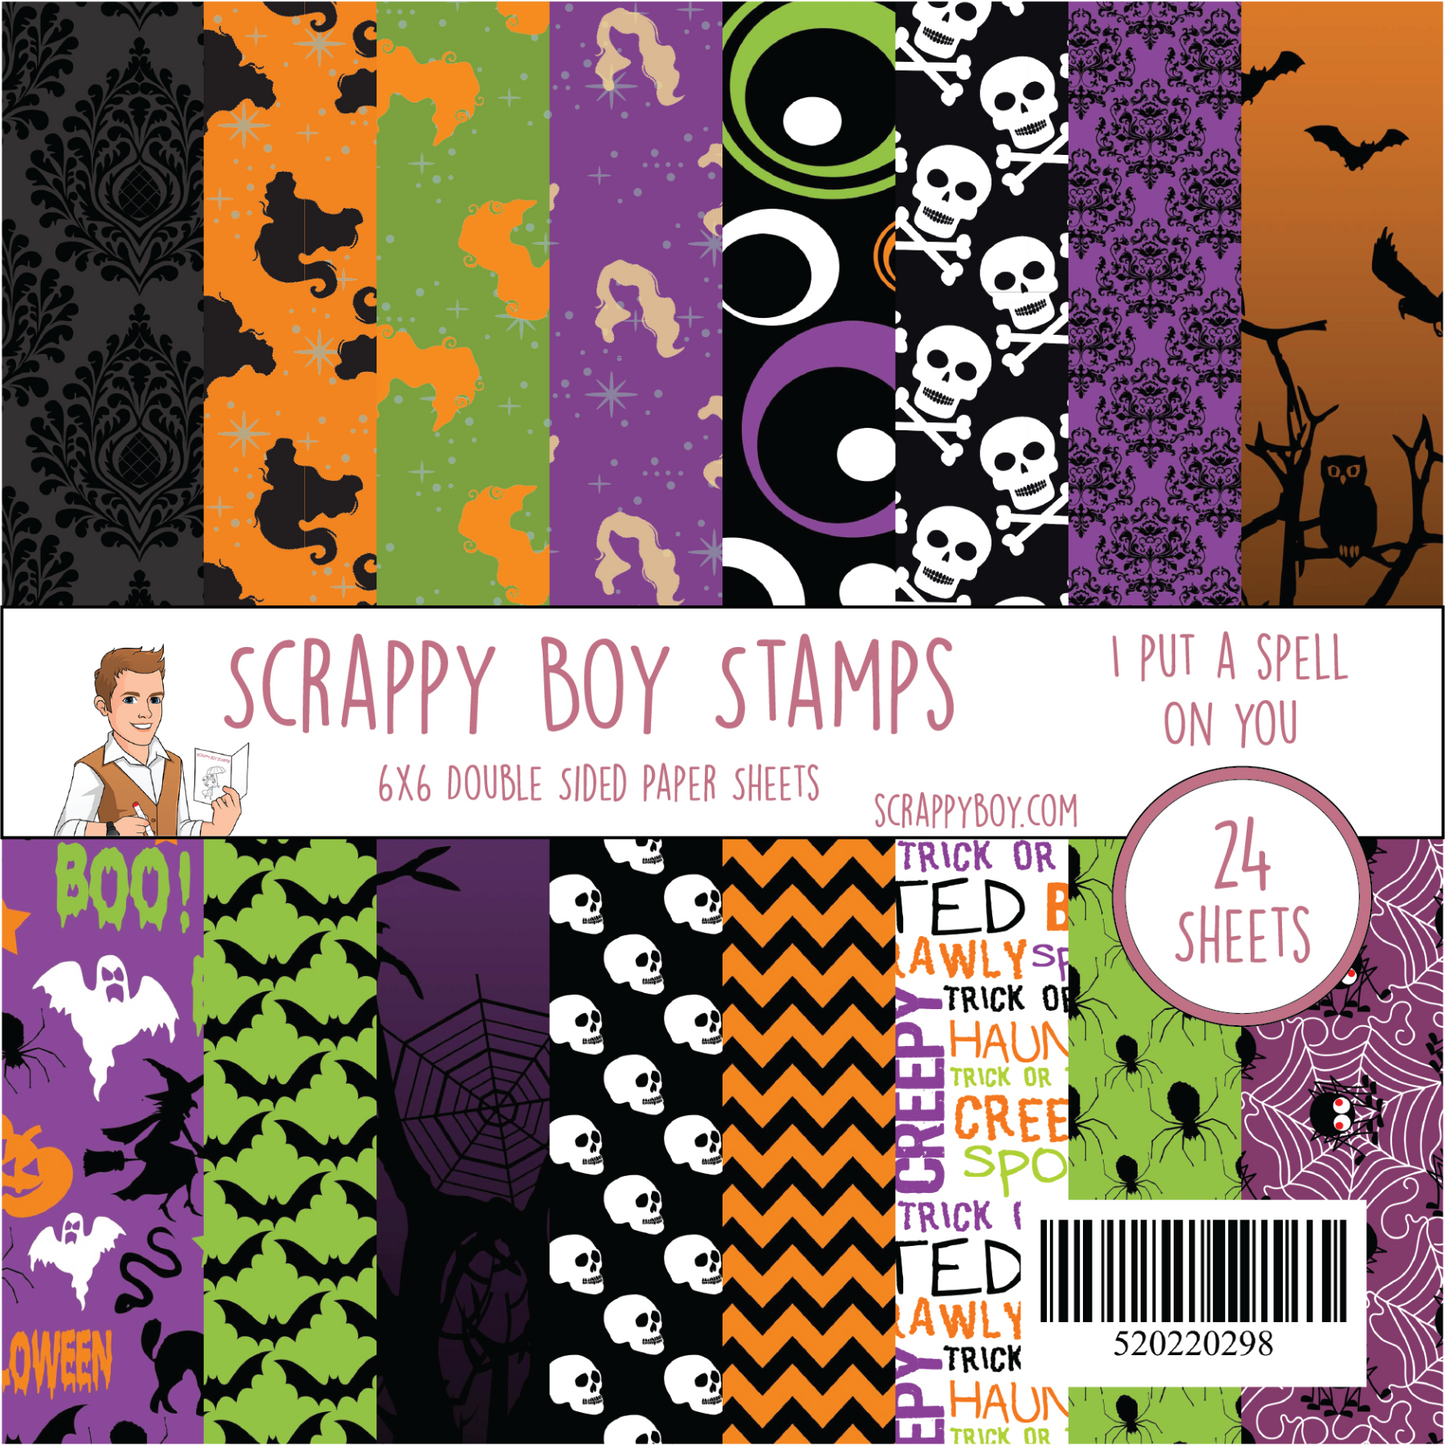 
                  
                    I Want It All Bundle - Cute Girls I Put A Spell On You Release Scrappy Boy Stamps
                  
                